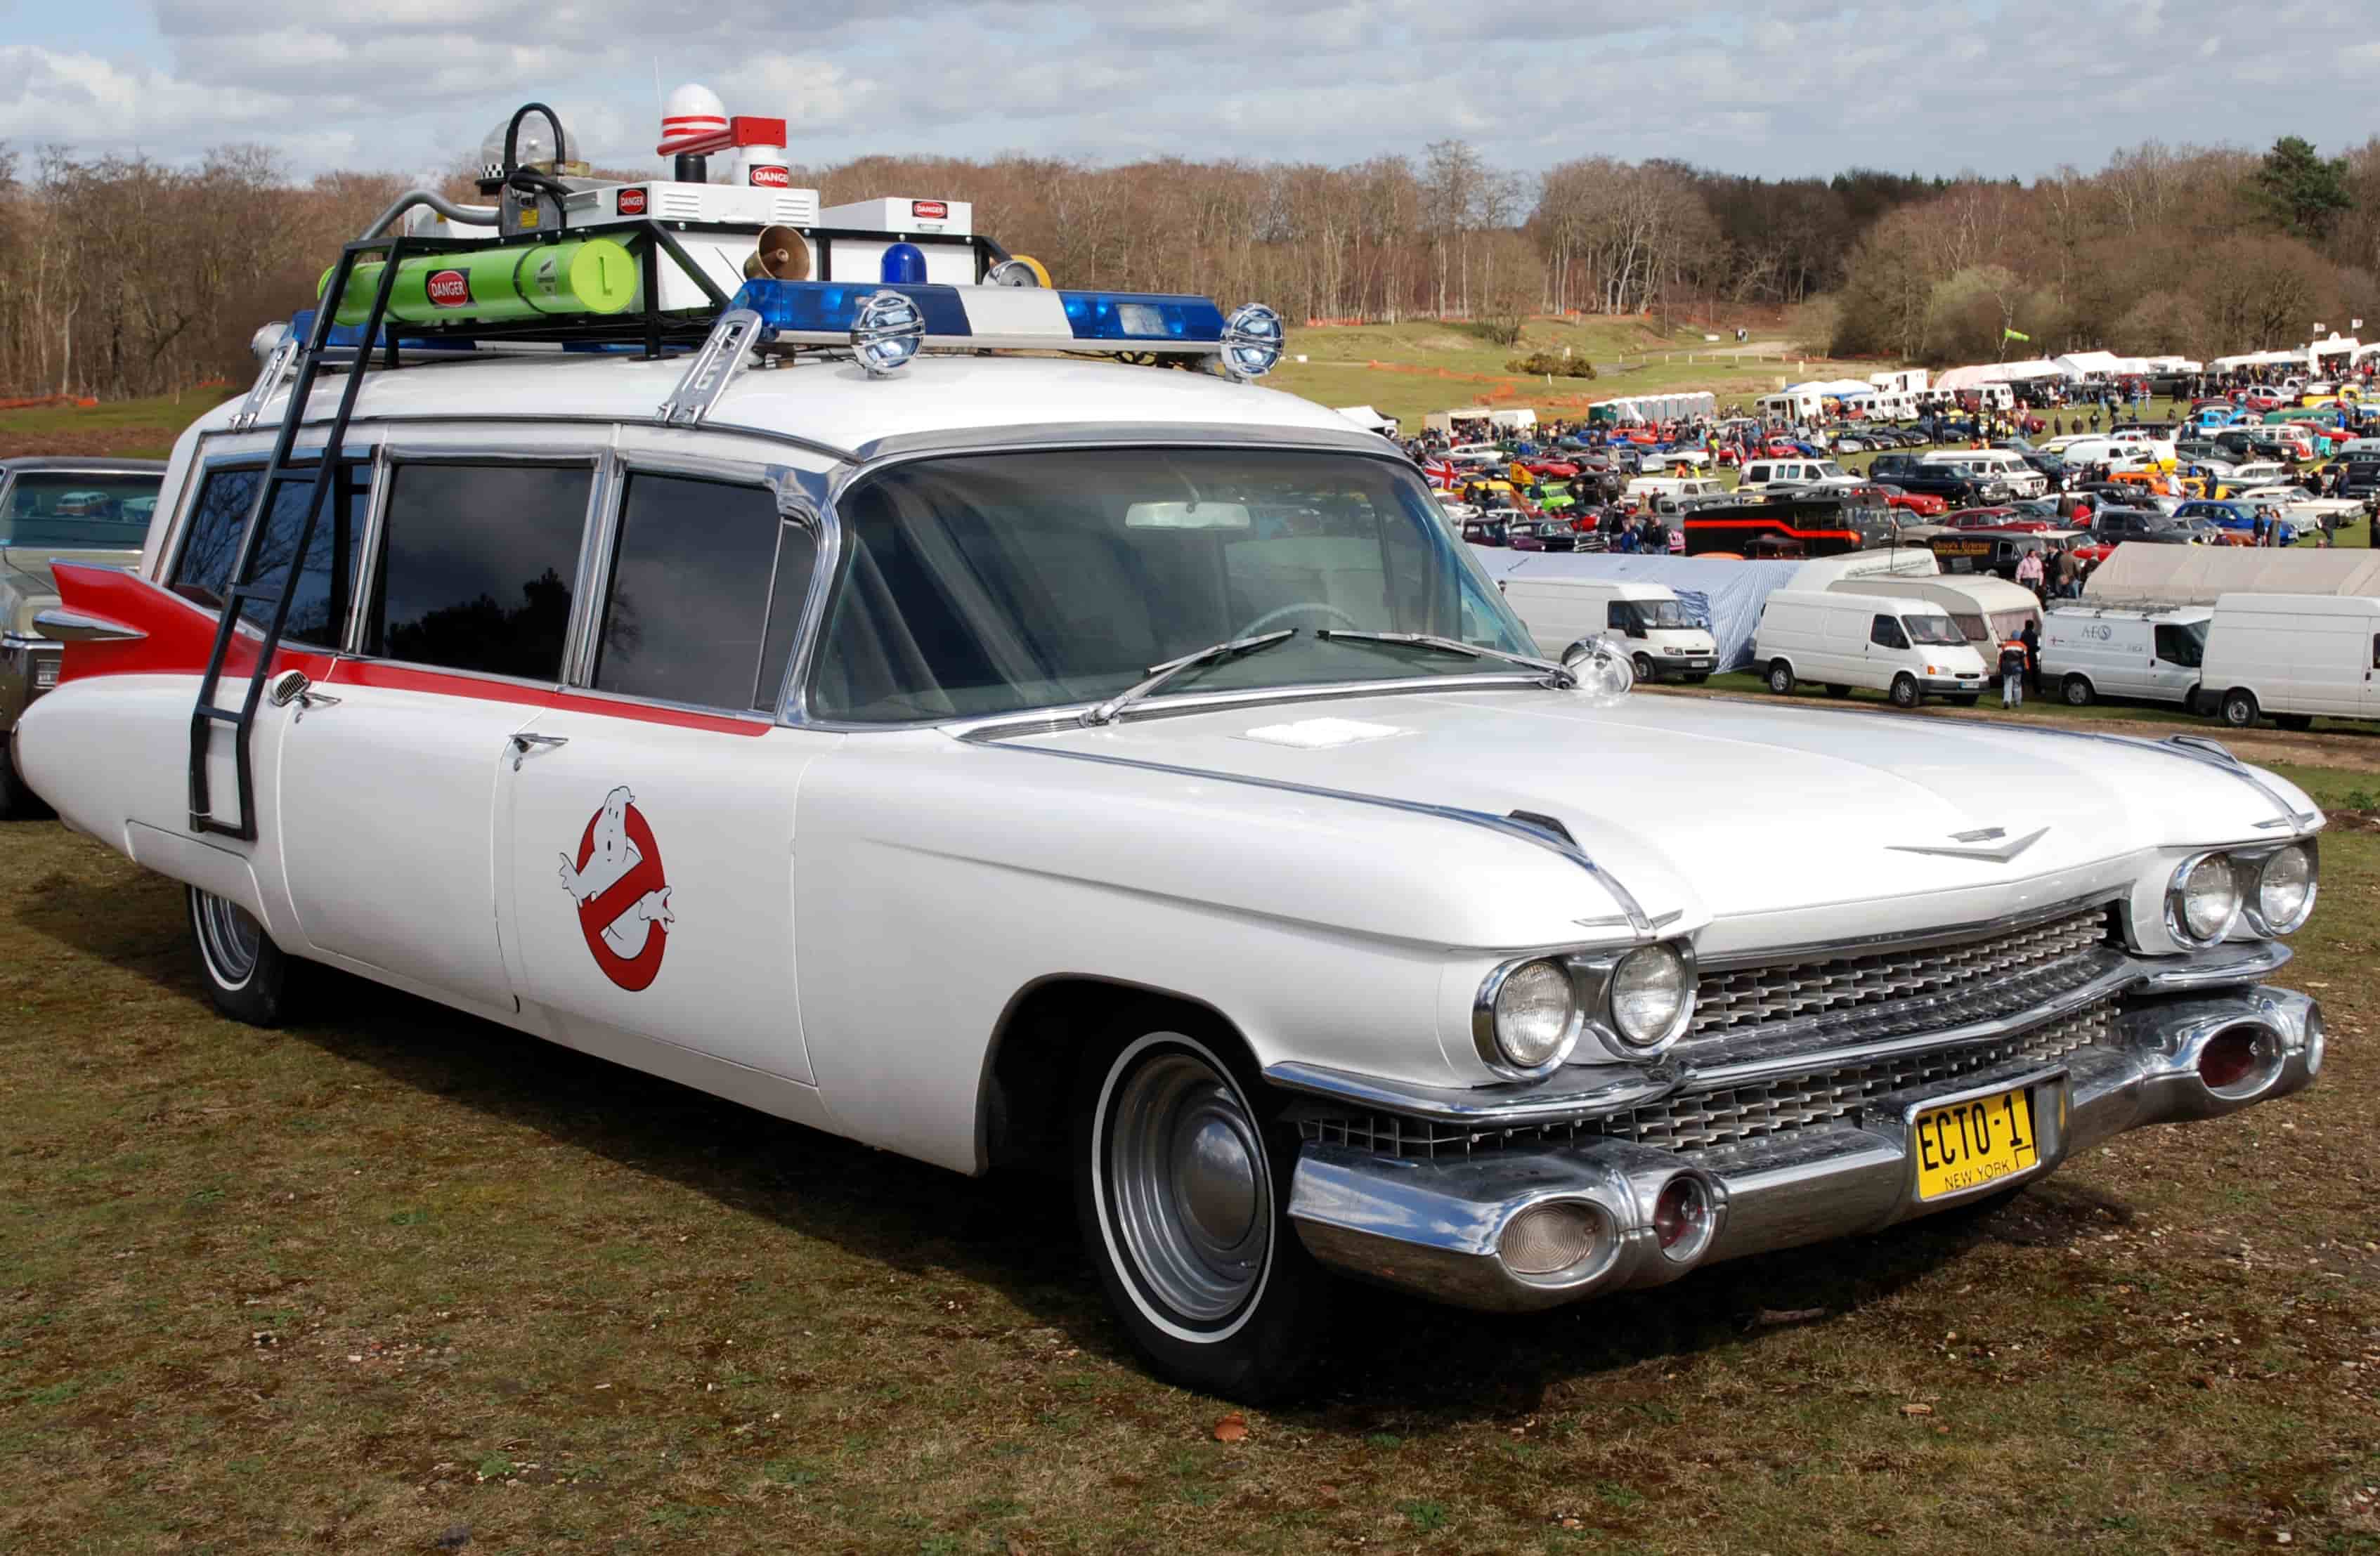 GHOSTBUSTERS’ 1959 CADILLAC MILLER-METEOR/ECTOMOBILE FRONT